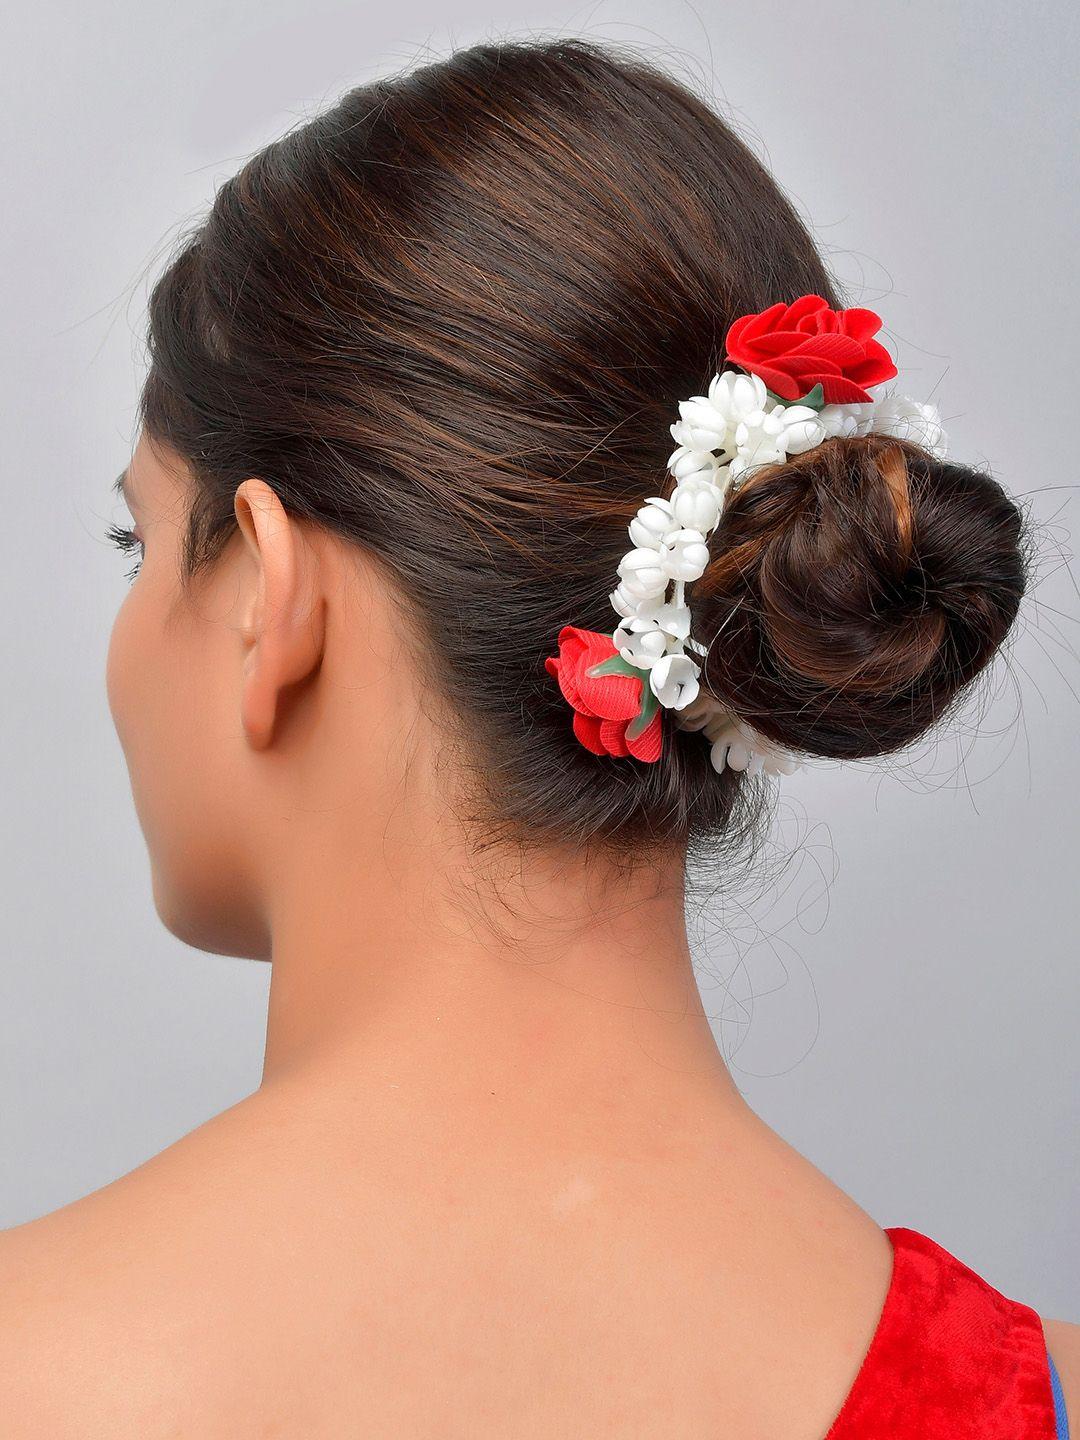 silvermerc-designs-women-white-&-red-lace-hair-accessory